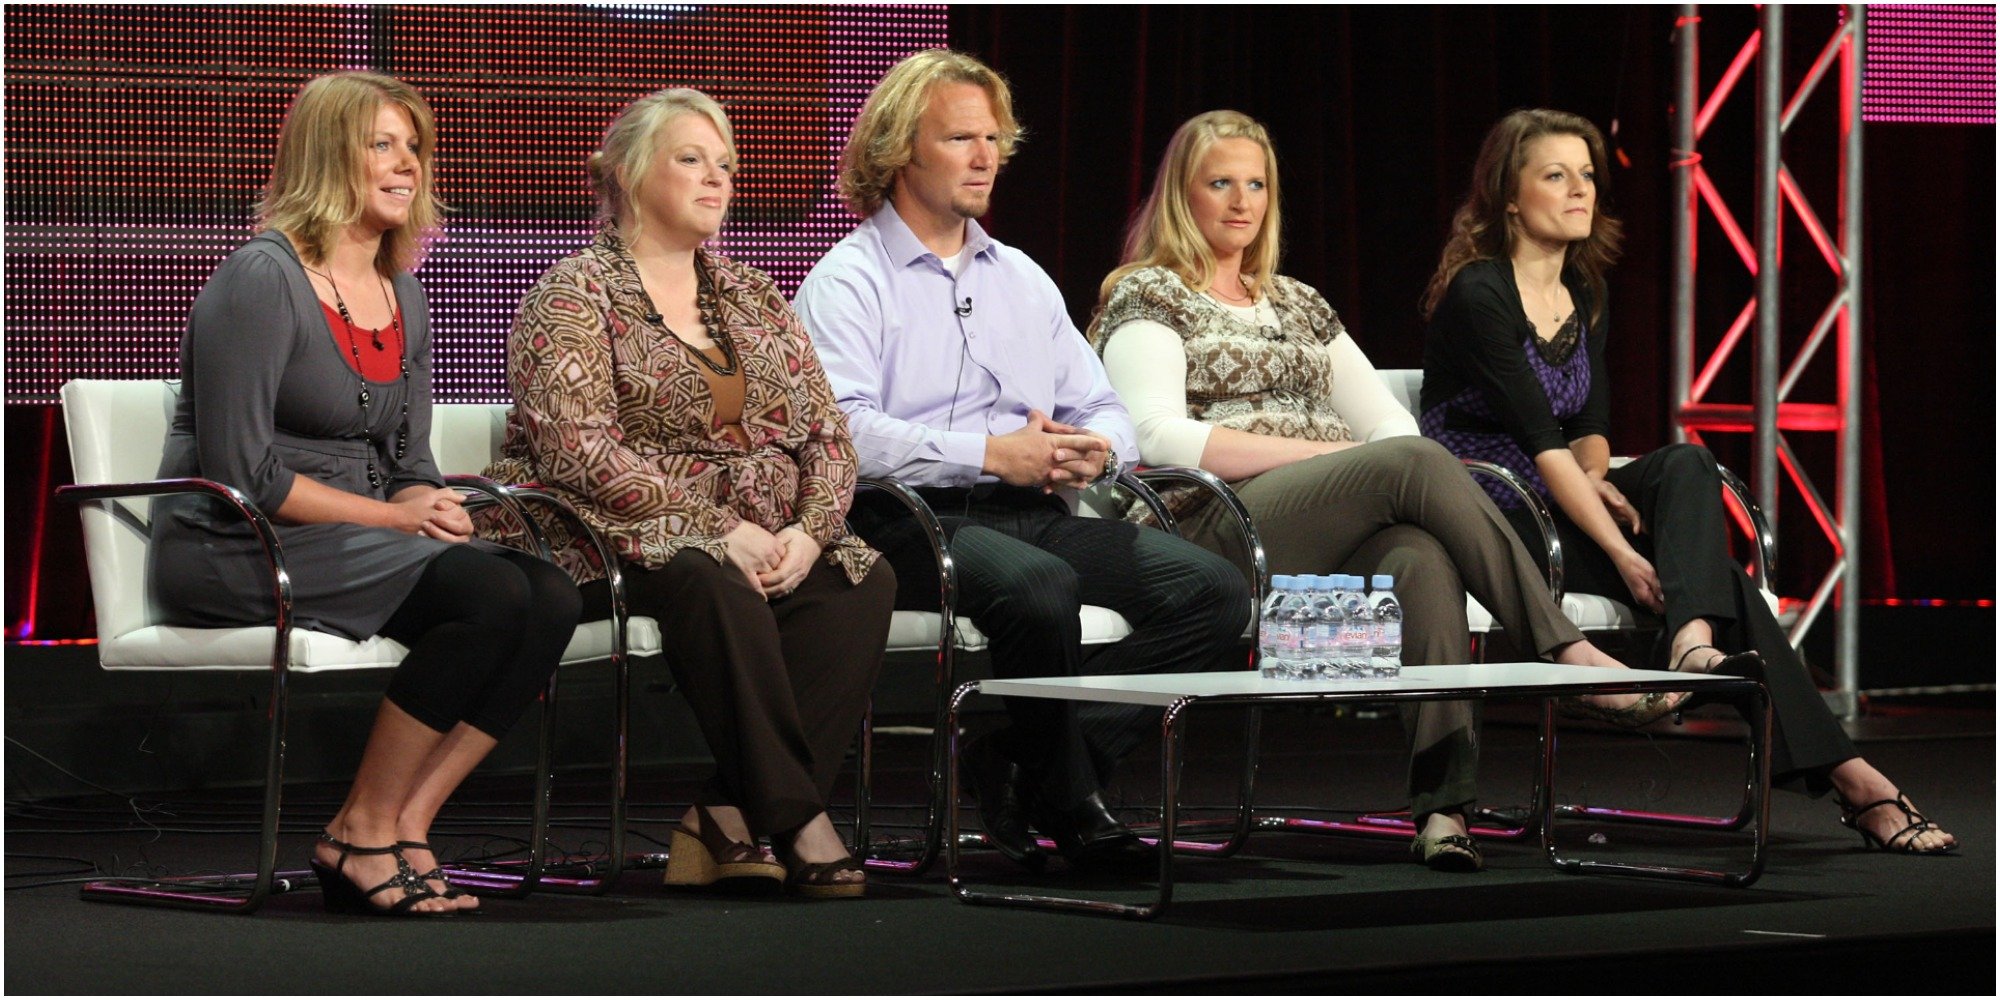 Meri Brown, Janelle Brown, Kody Brown, Christine Brown and Robyn Brown of Sister Wives appear at the 2010 TCA Press Tour